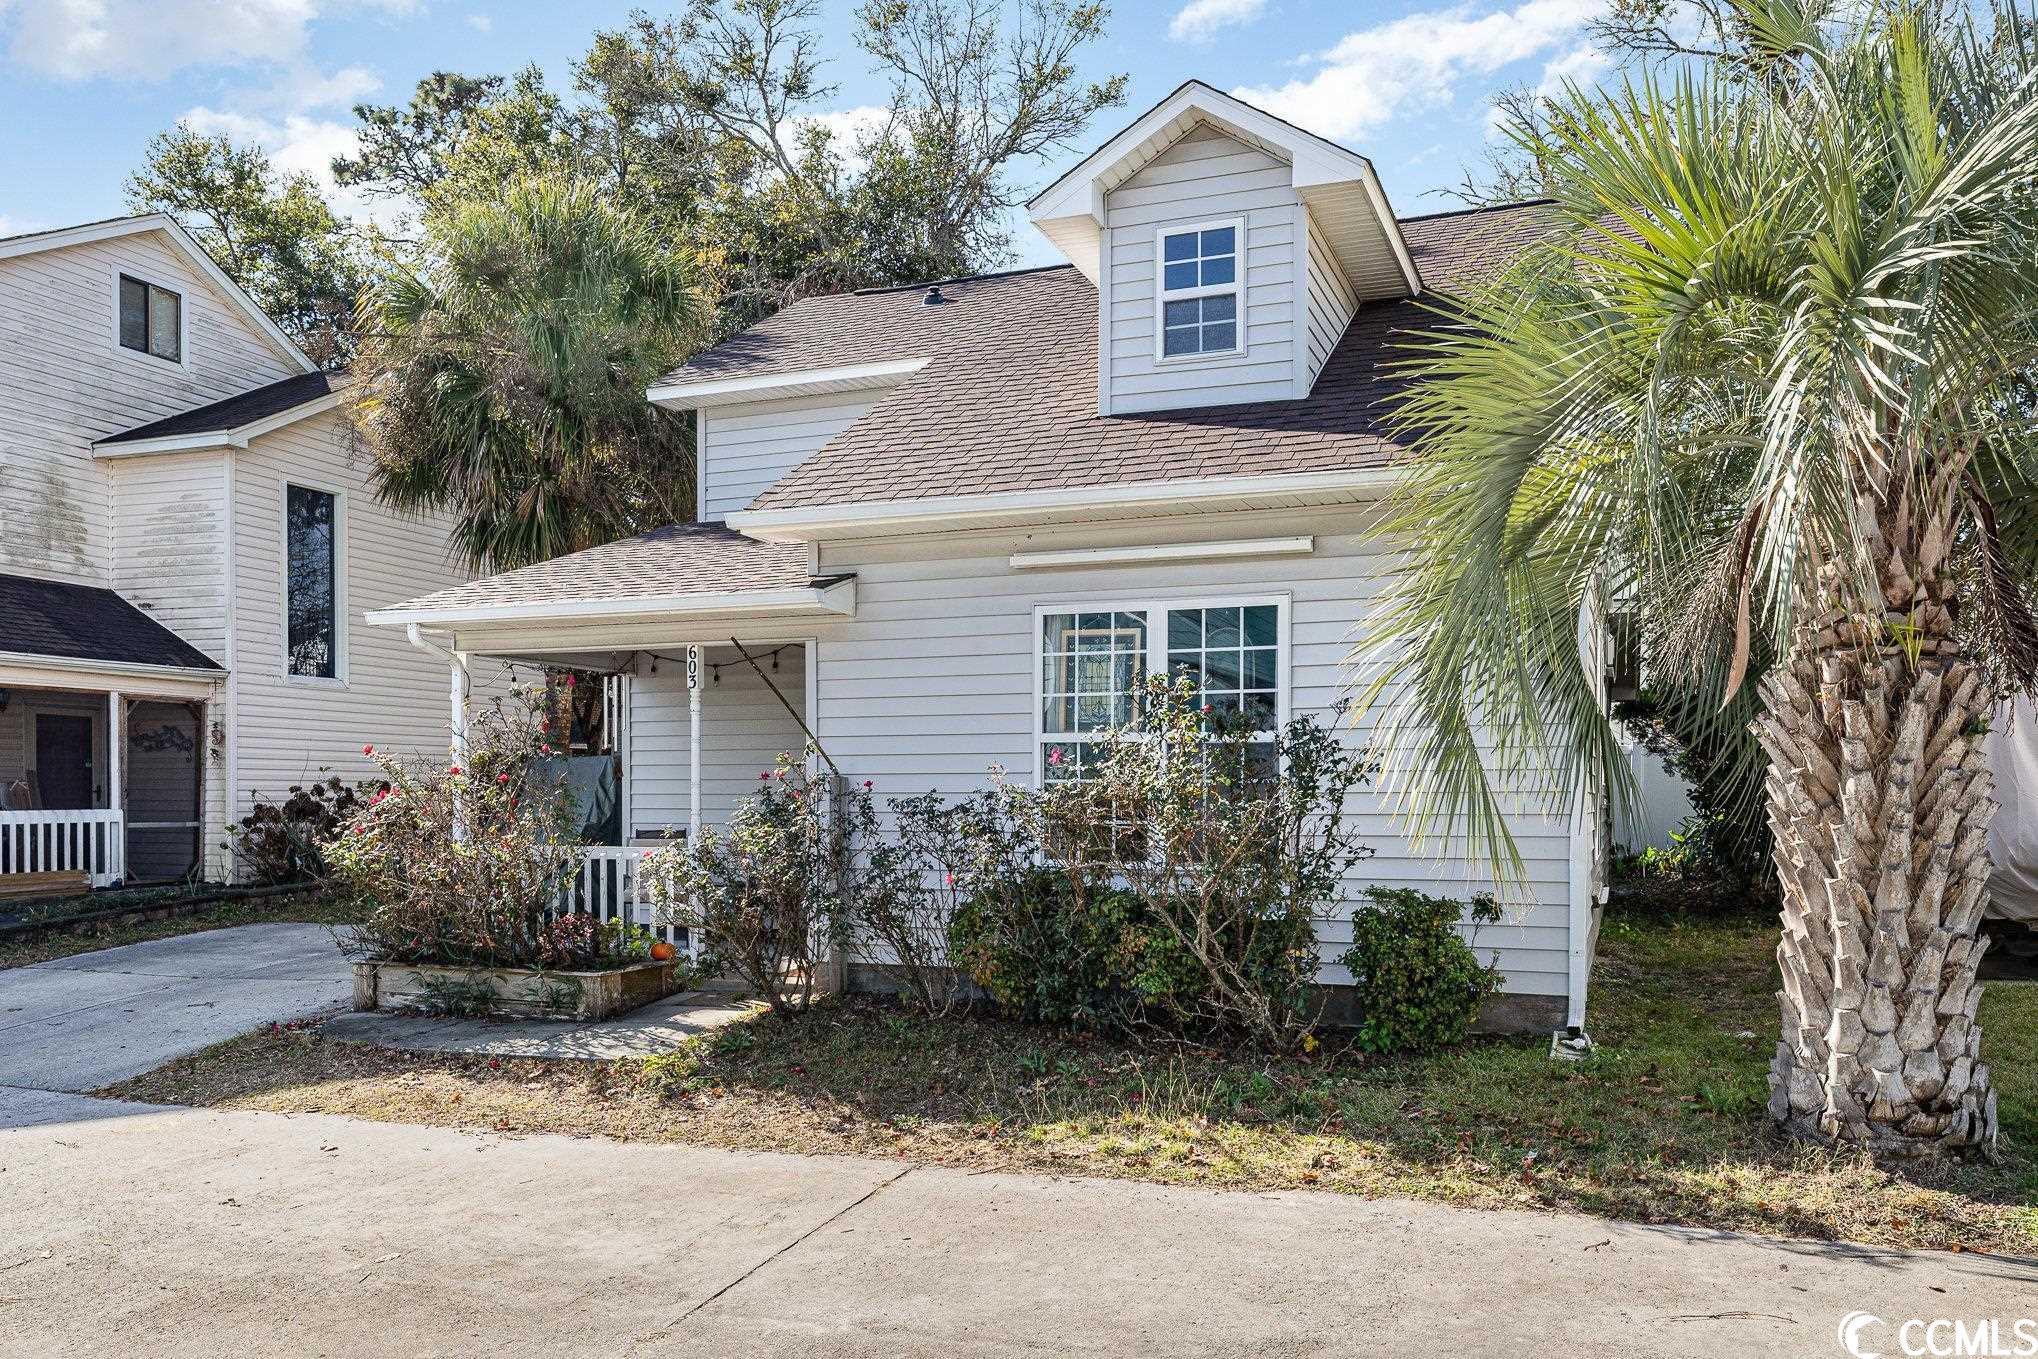 Photo one of 603 Bentwood Ct. North Myrtle Beach SC 29582 | MLS 2401234